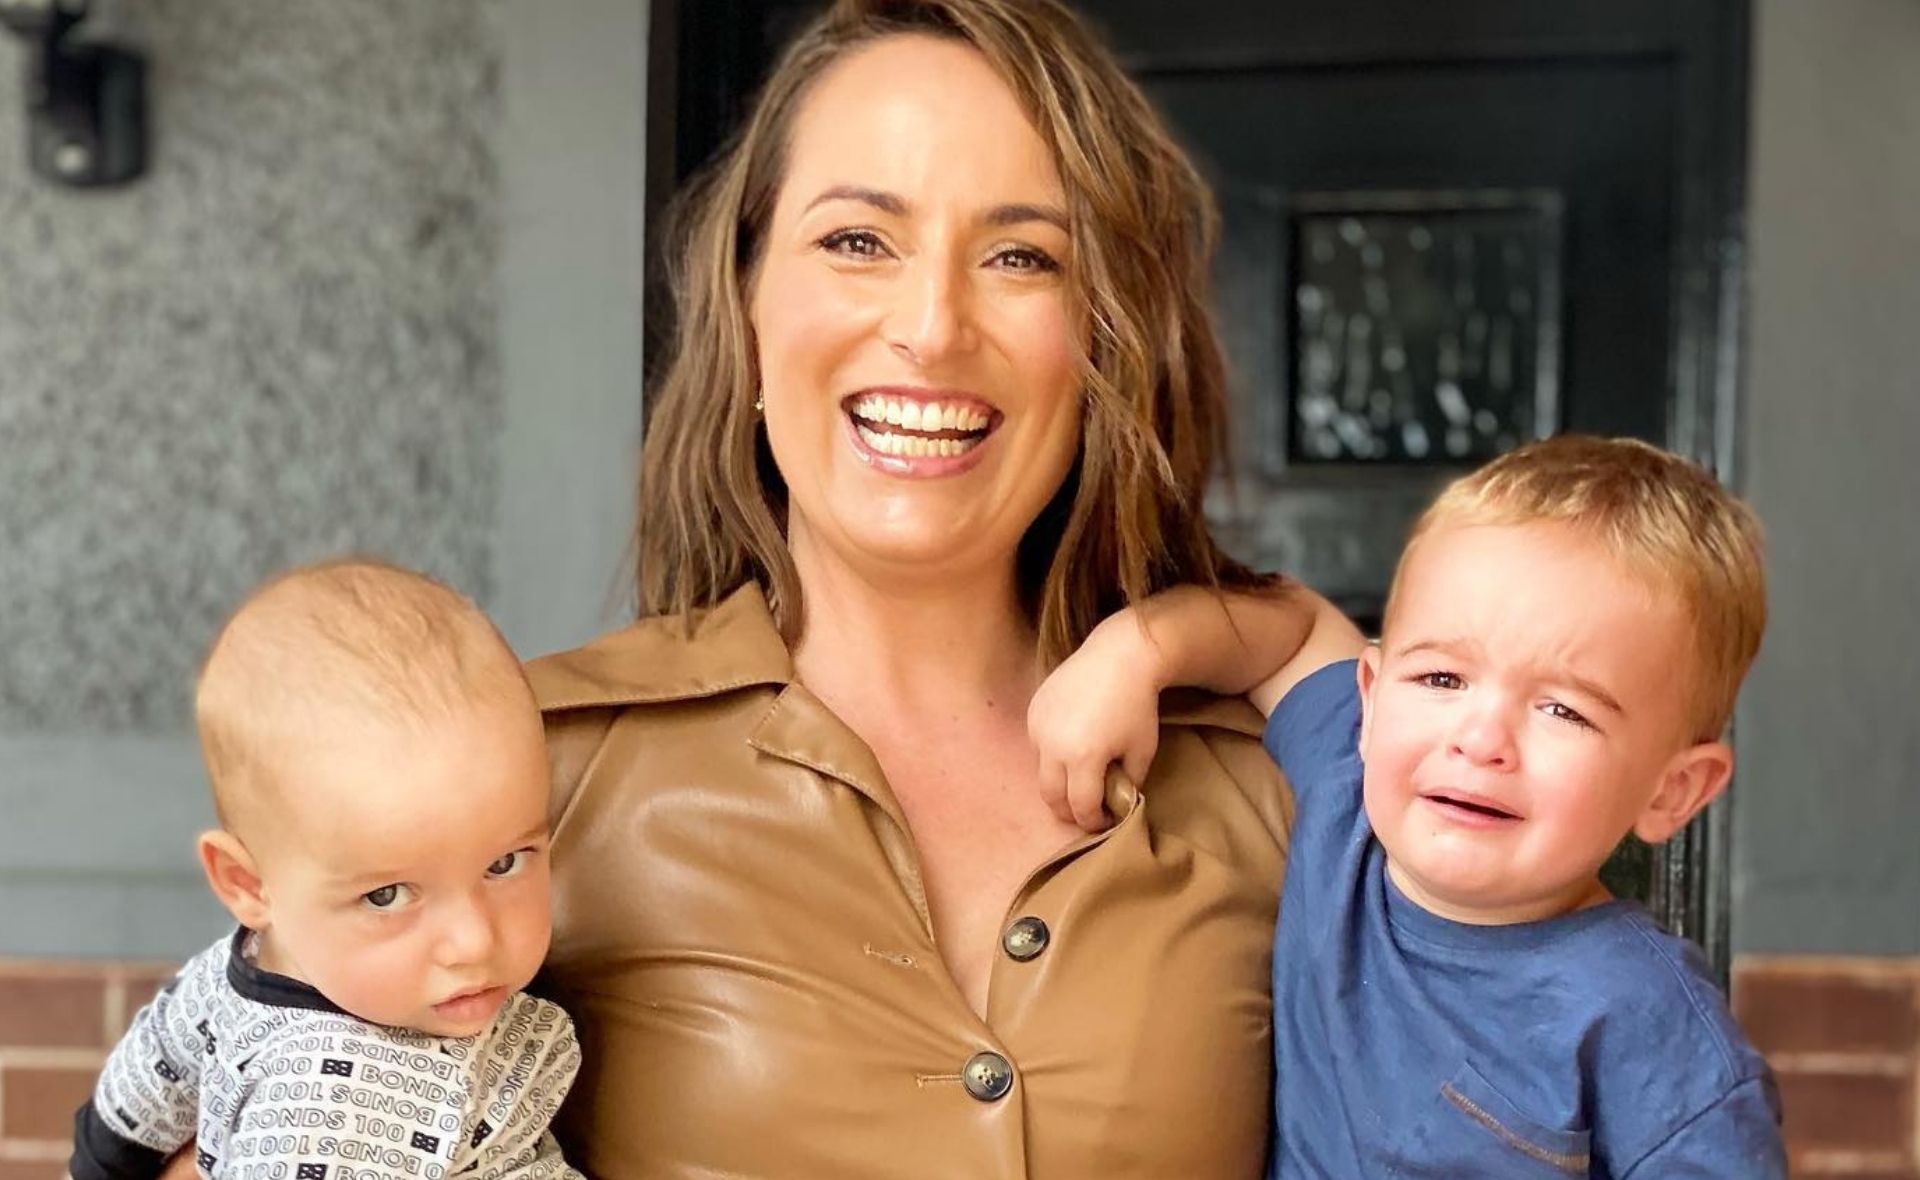 TV personality Jayne Azzopardi makes raising two boys look effortless – but her road to parenthood wasn’t easy